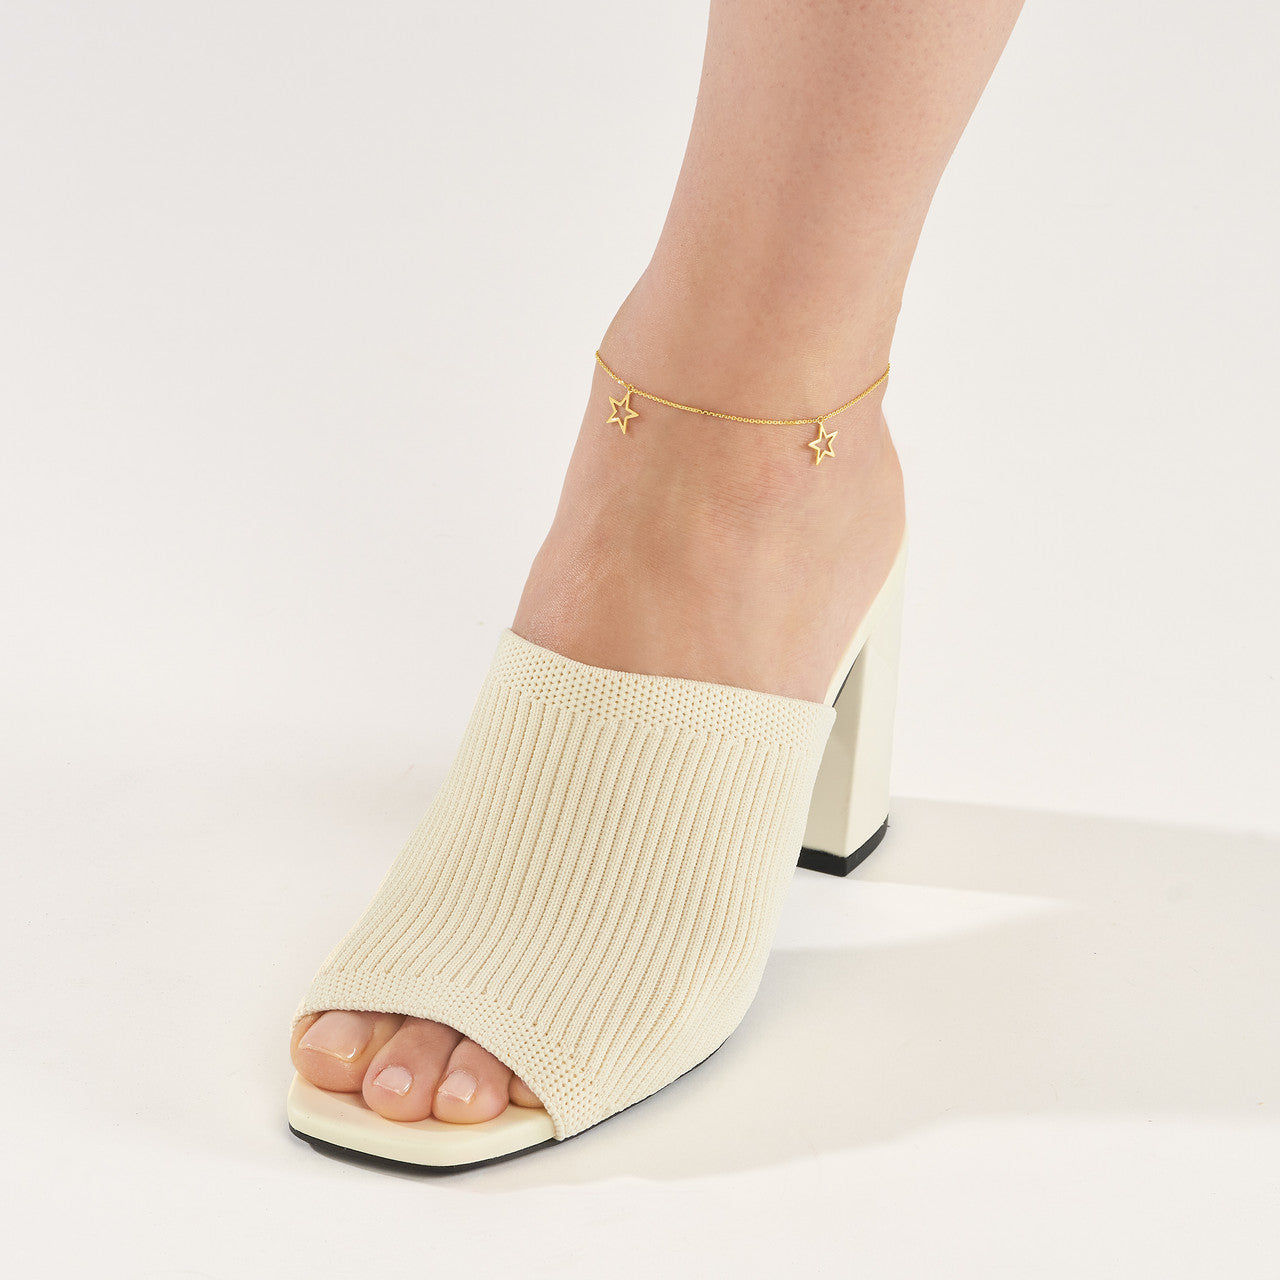 Triple Star Adjustable Anklet 14k Yellow Gold